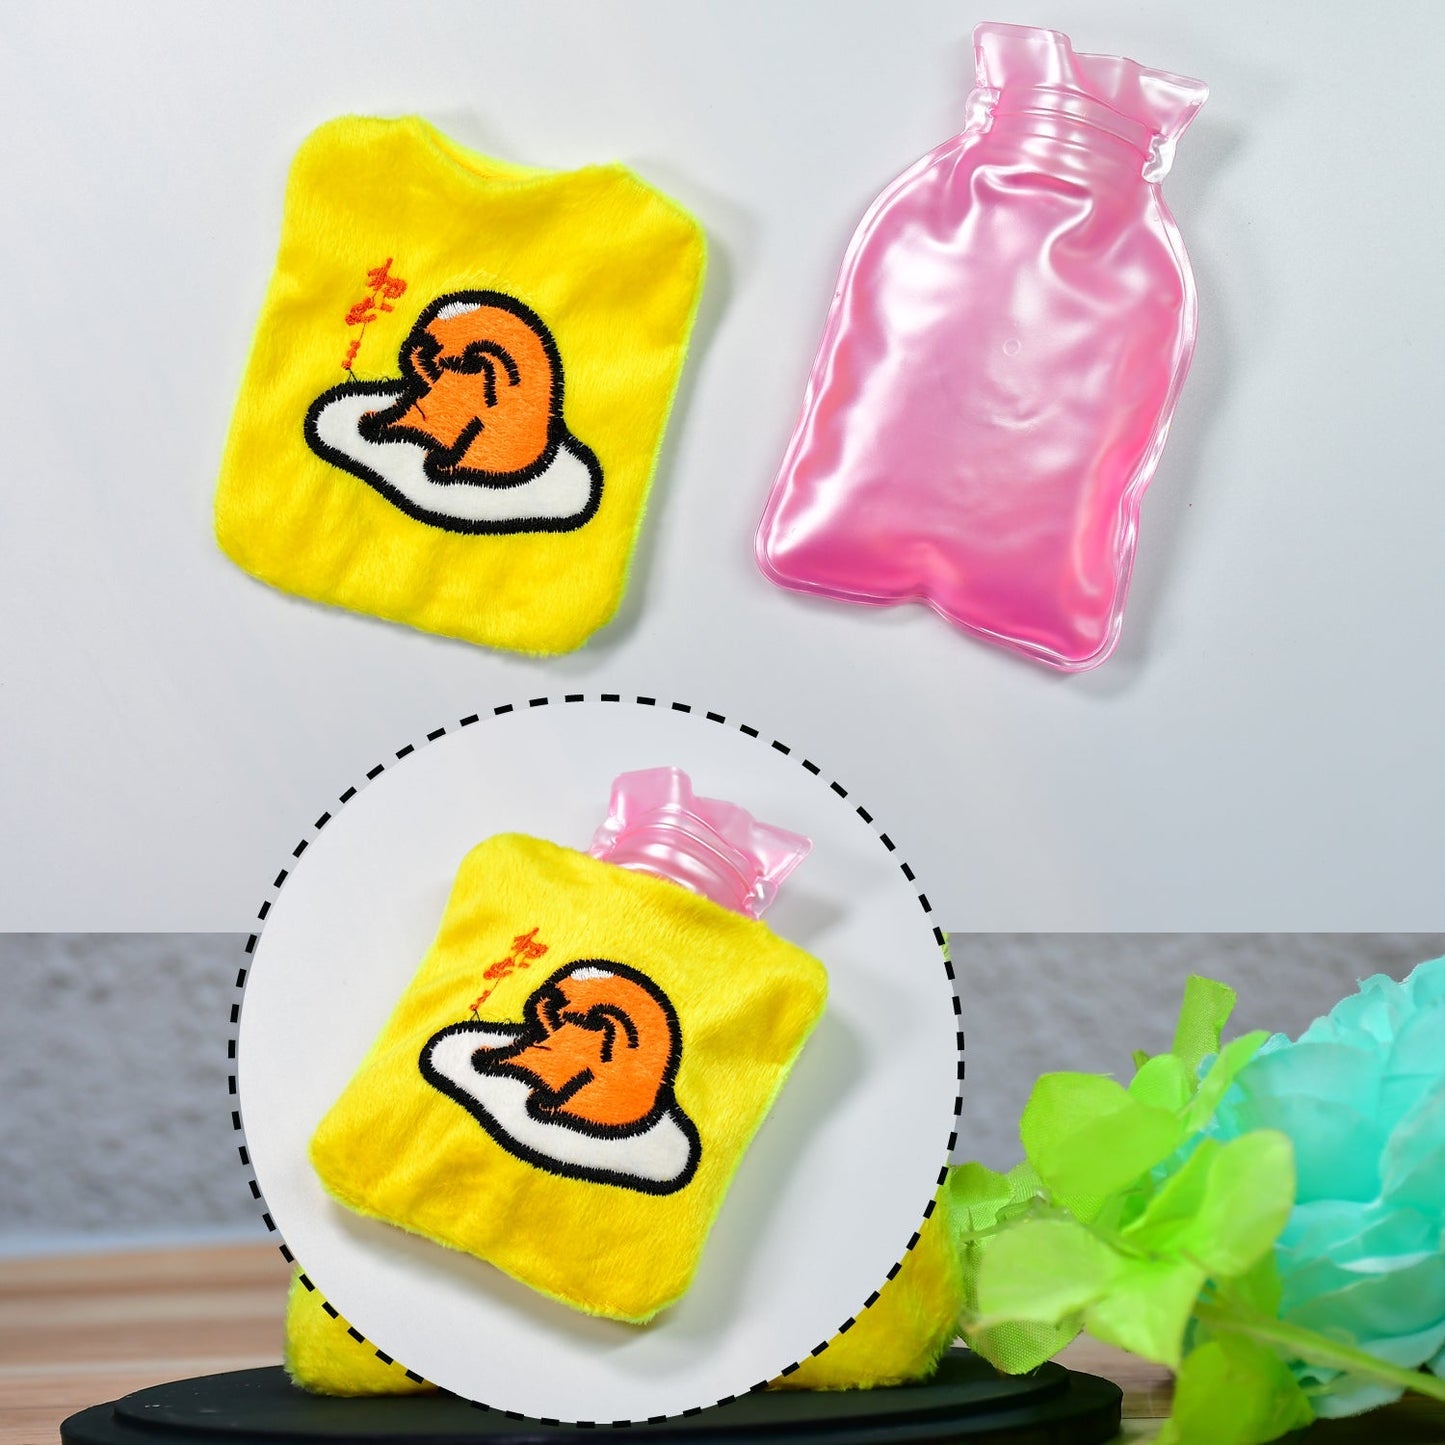 Yellow Duck Head Small Hot Water Bag with Cover for Pain Relief, Neck, Shoulder Pain and Hand, Feet Warmer, Menstrual Cramps